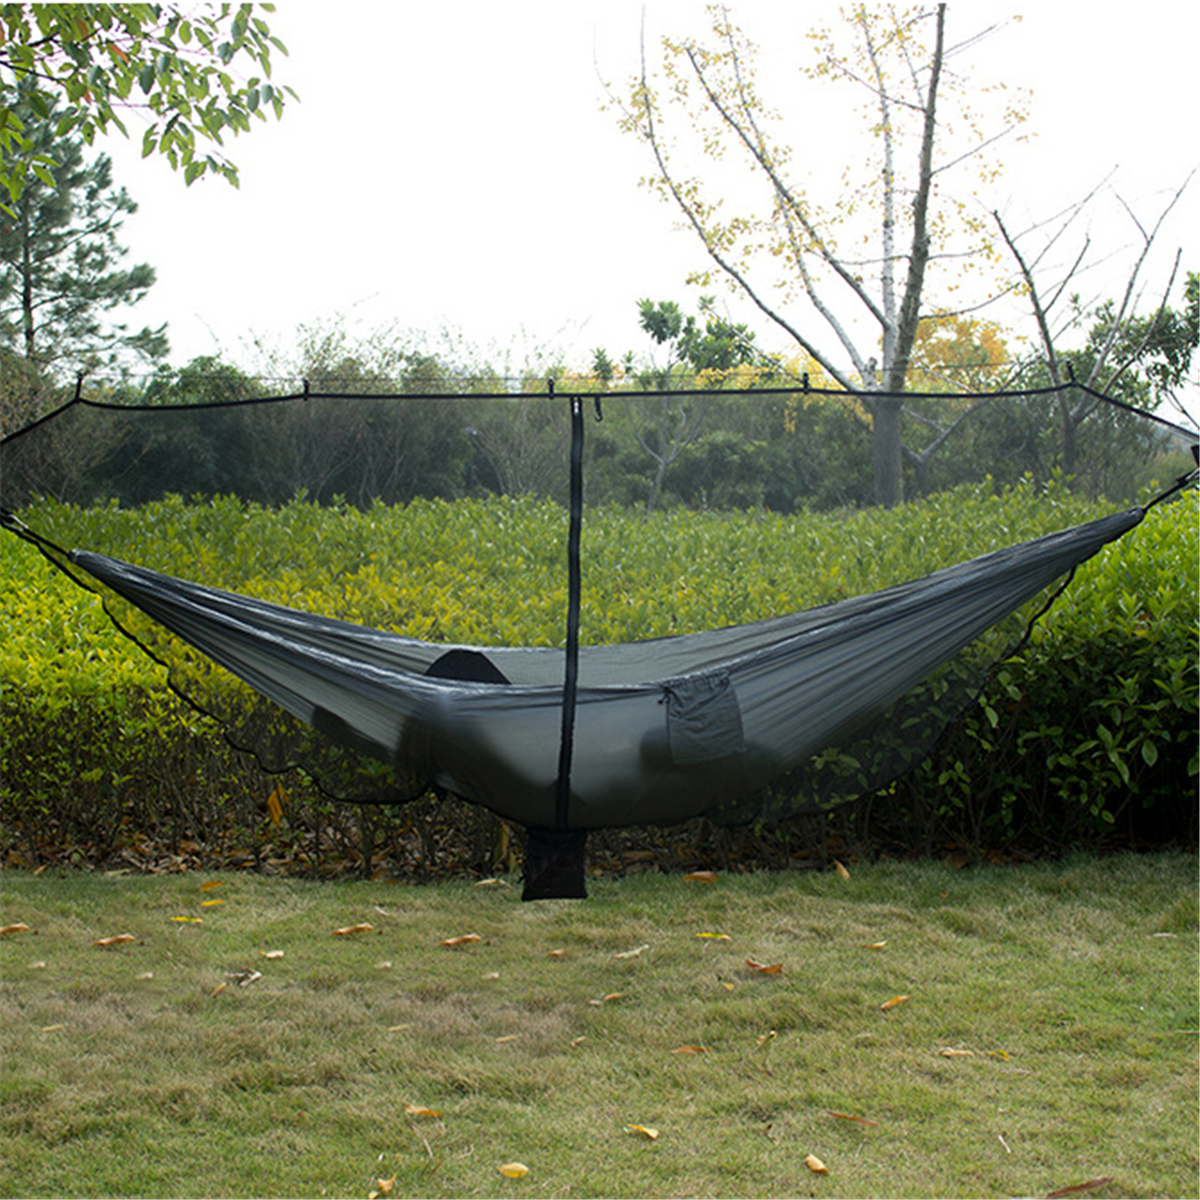 Outdoor-Portable-Hammock-Mosquito-Insect-Net-Camping-Swing-Bed-Gauze-Protection-1336853-9